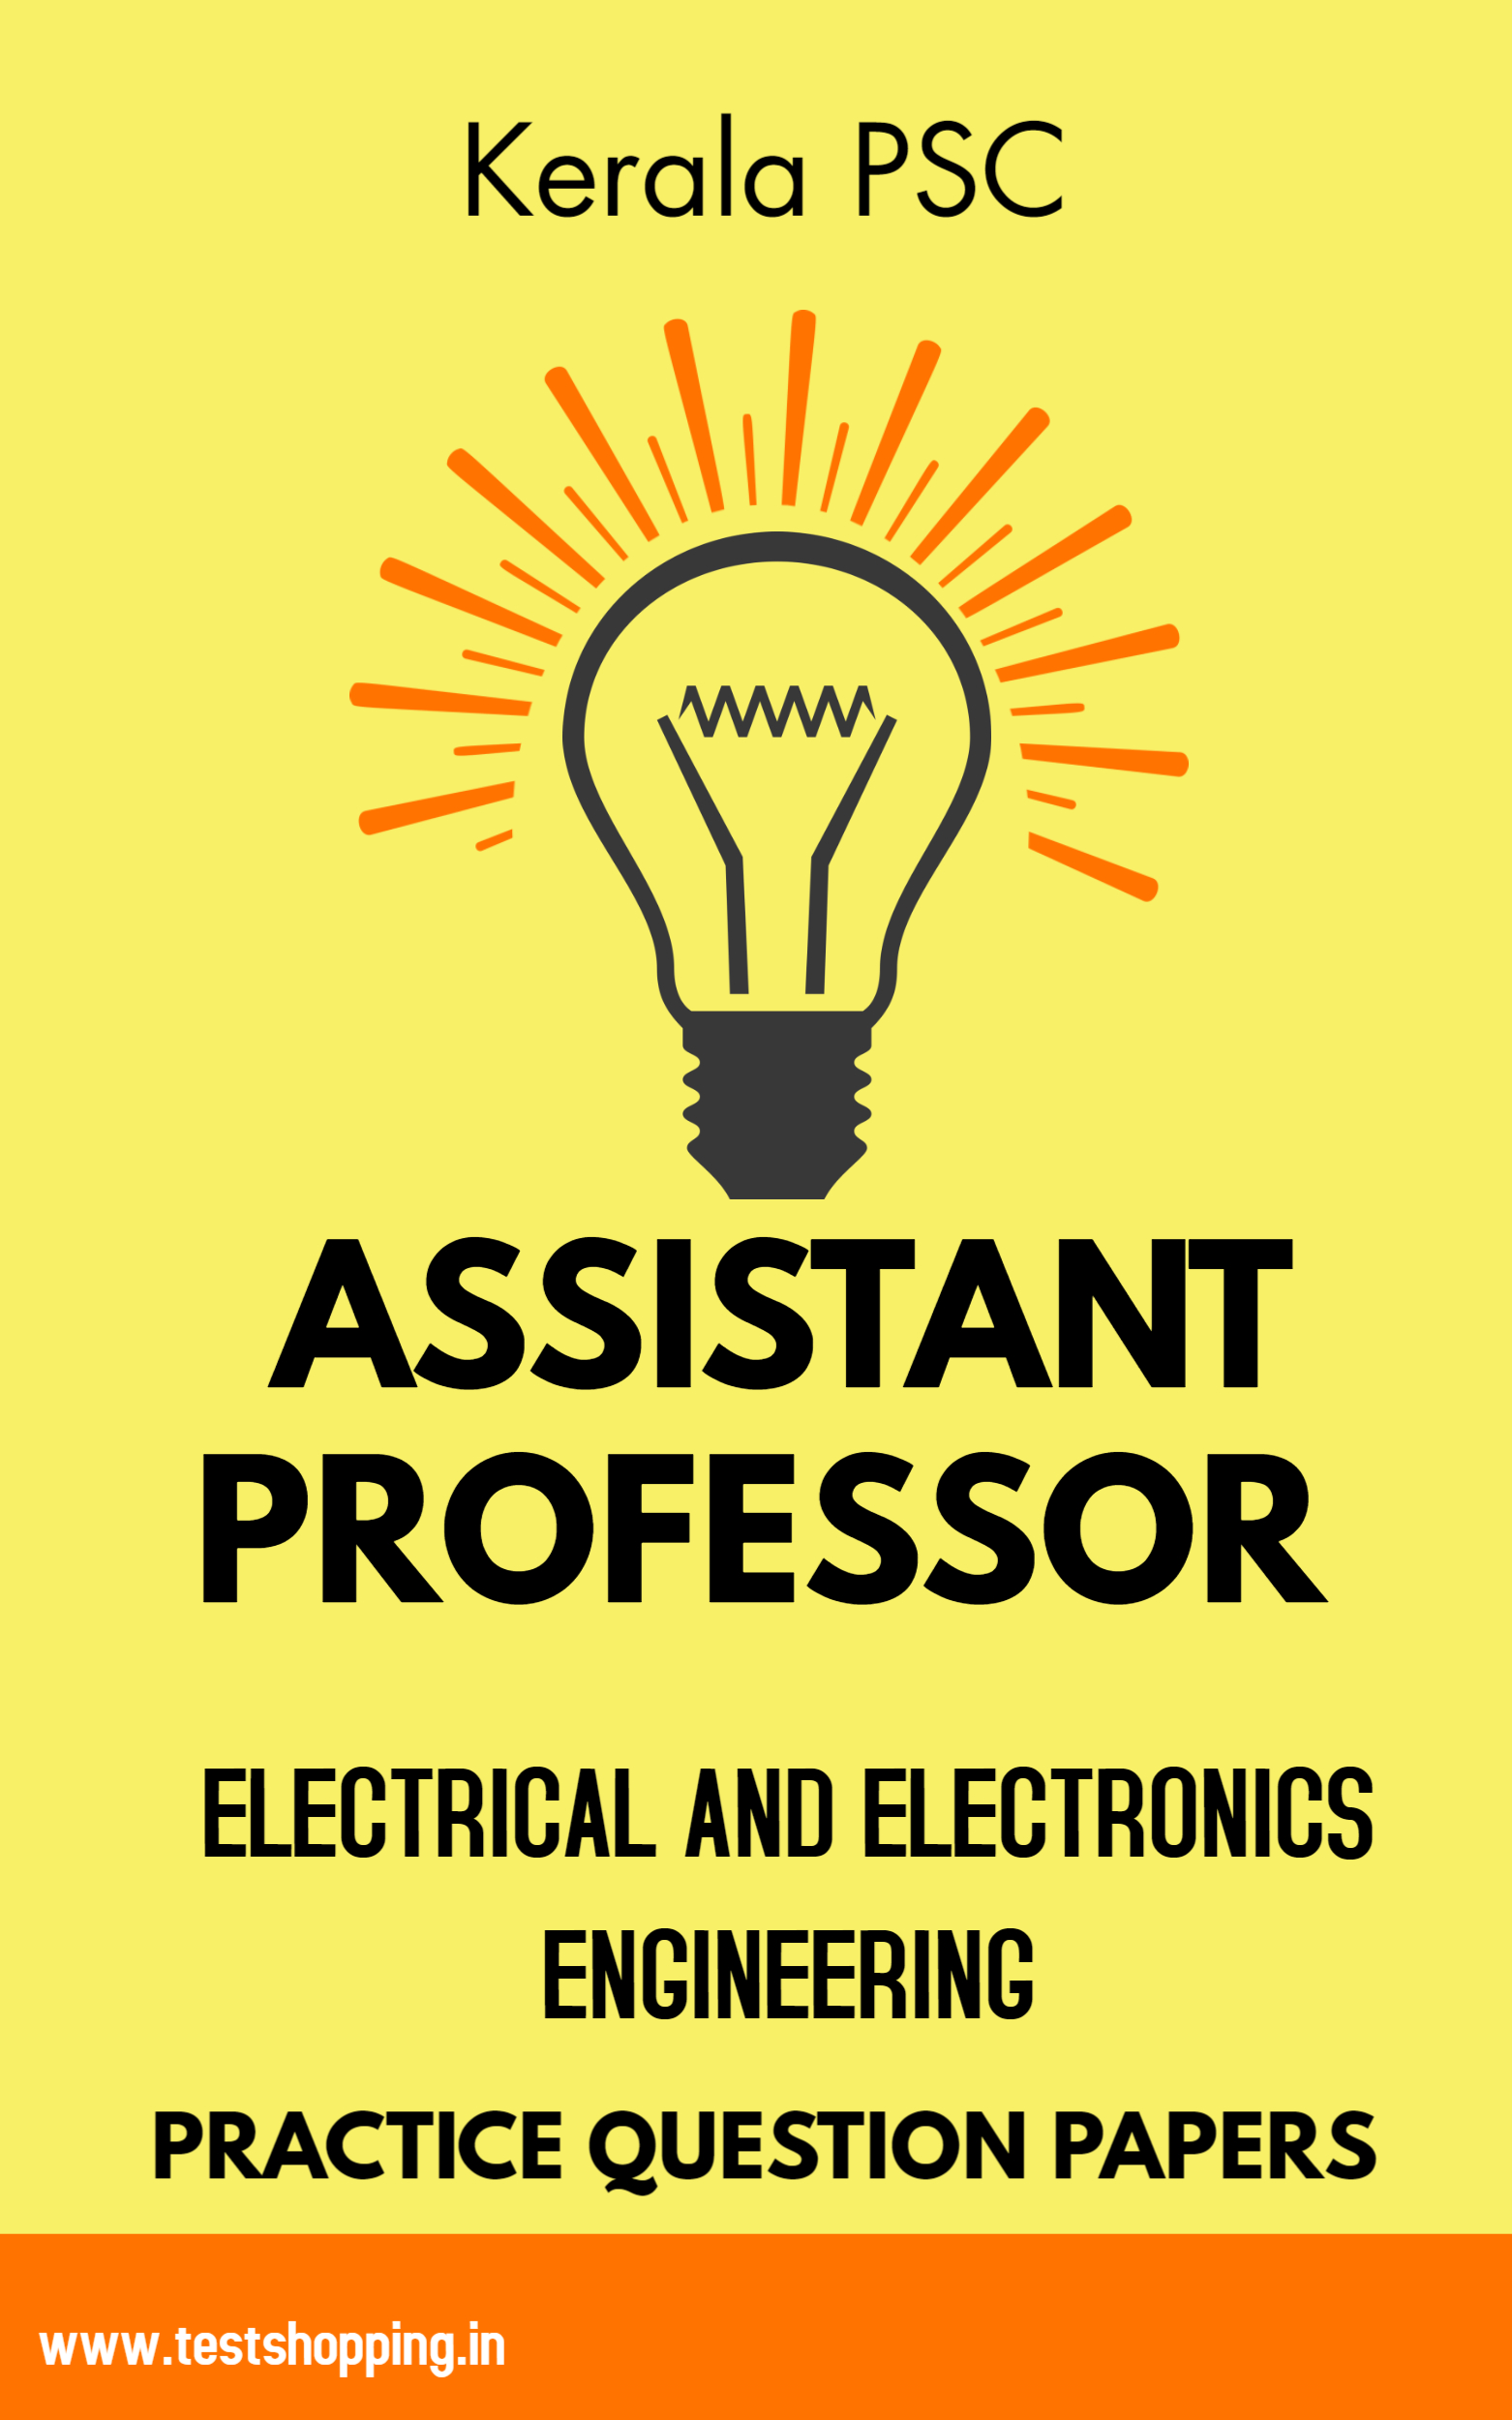 Kerala PSC Assistant Professor Electrical Engineering Practice Question Papers Set